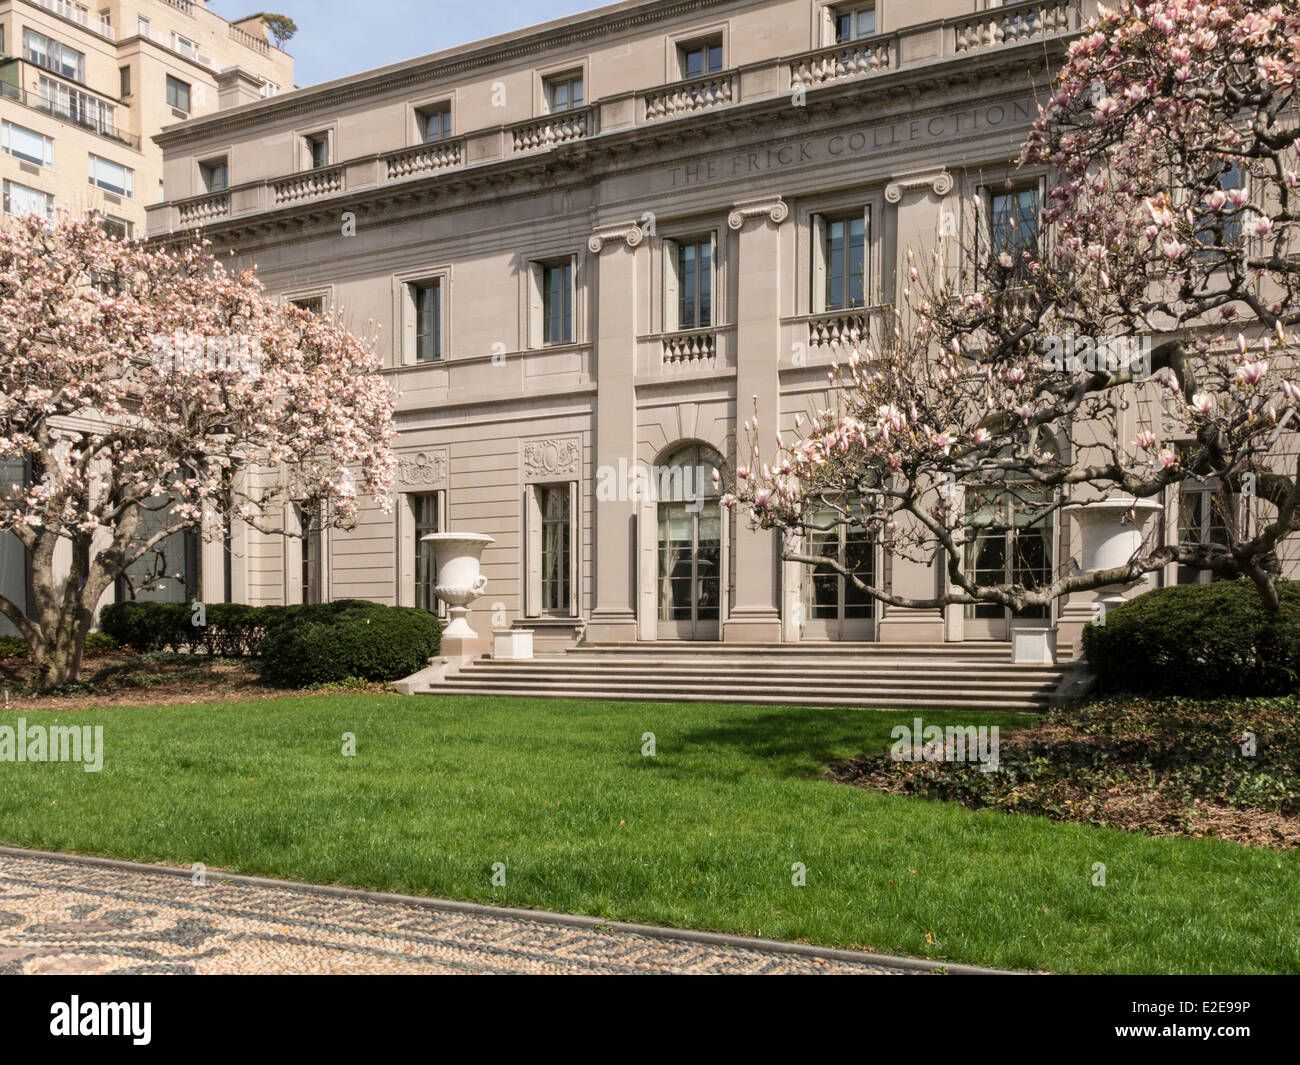 Frick Collection, New York City Museum Stock Photo